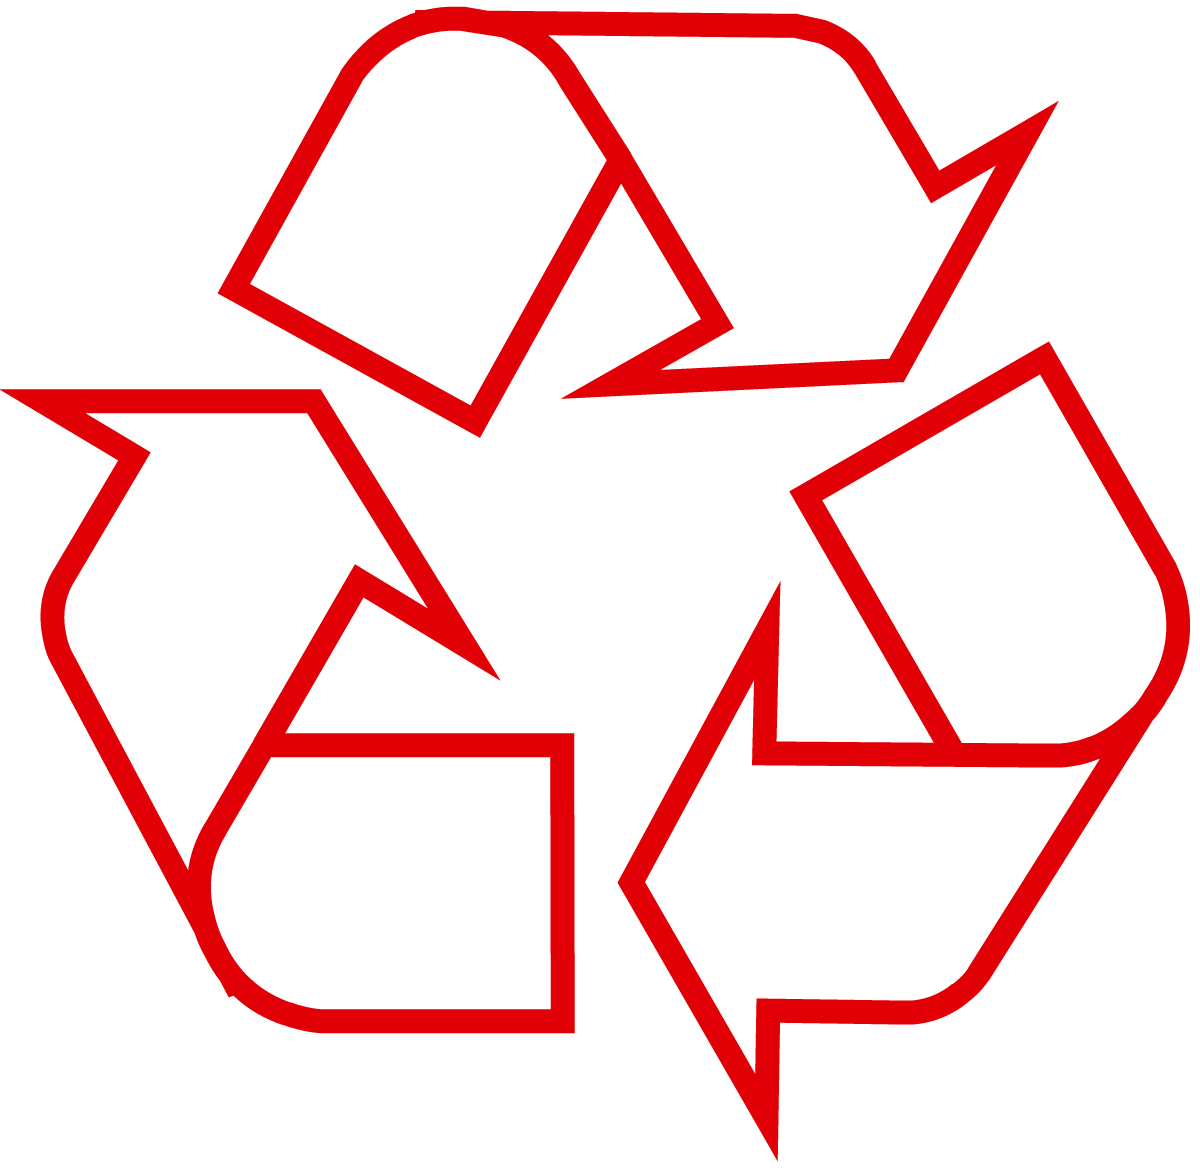 Red Recycle Logo - Recycling Symbol - Download the Original Recycle Logo